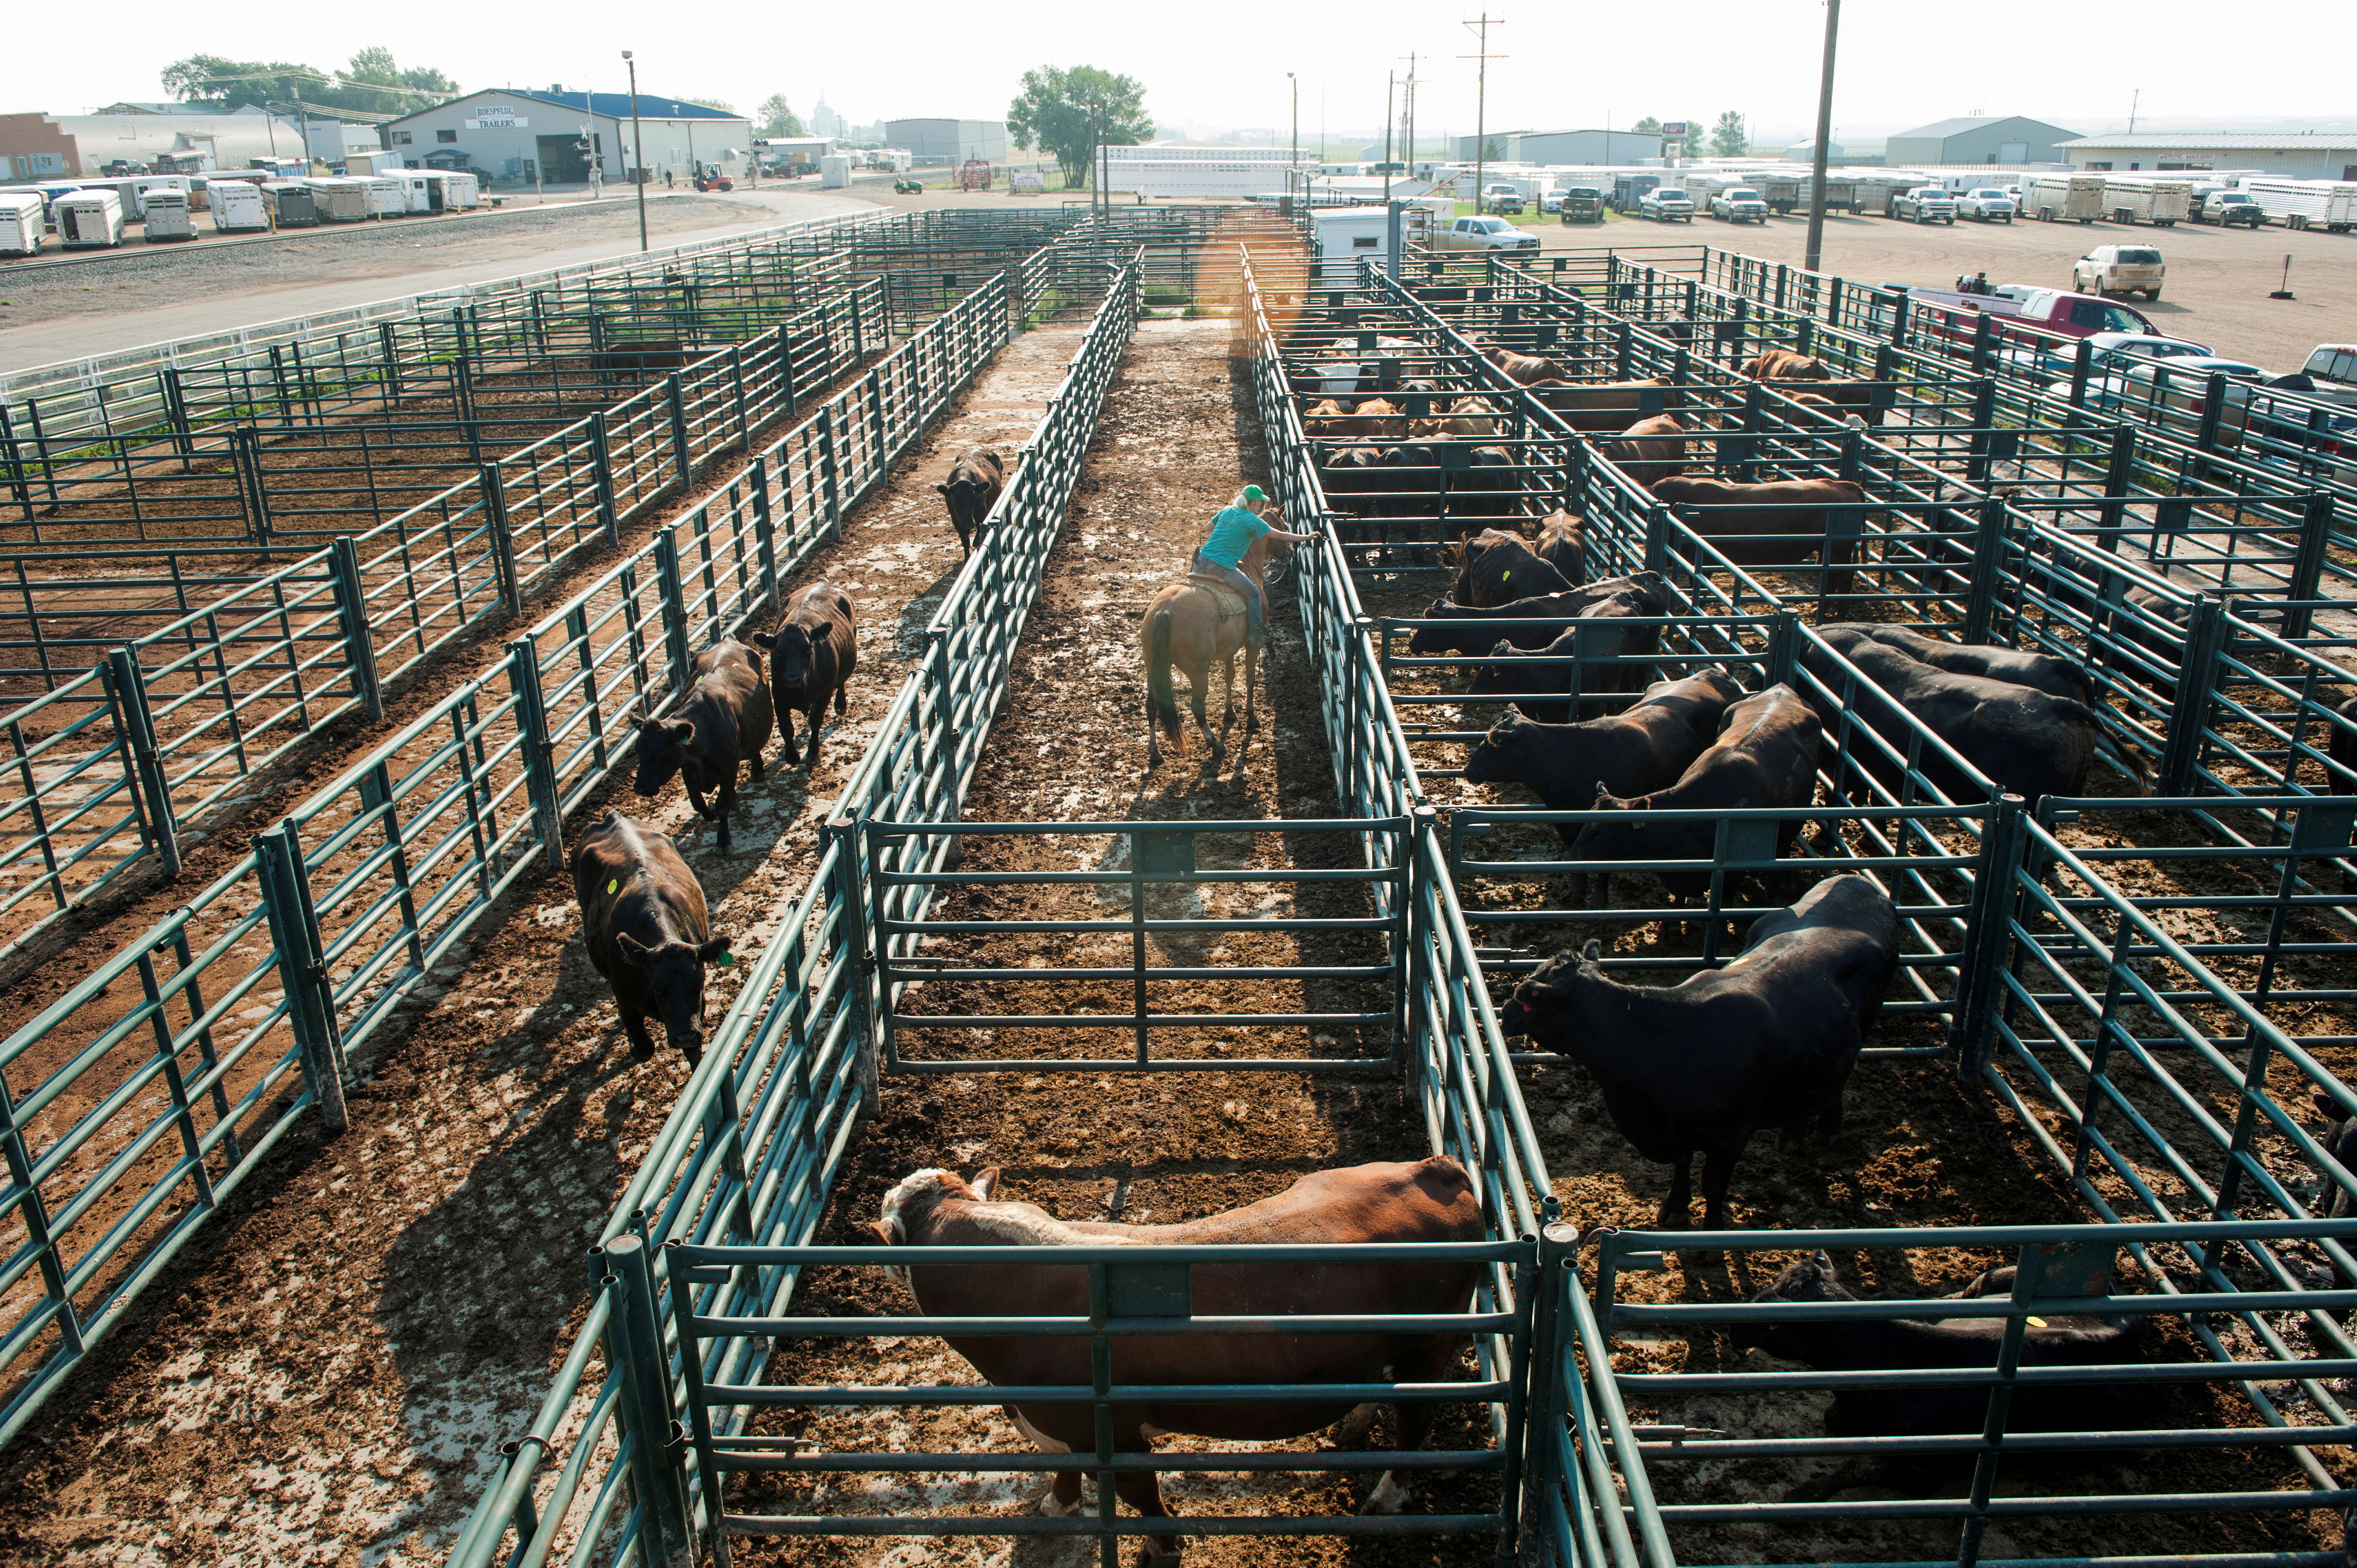 Cows are sorted into pens for a livestock auction in Dickinson